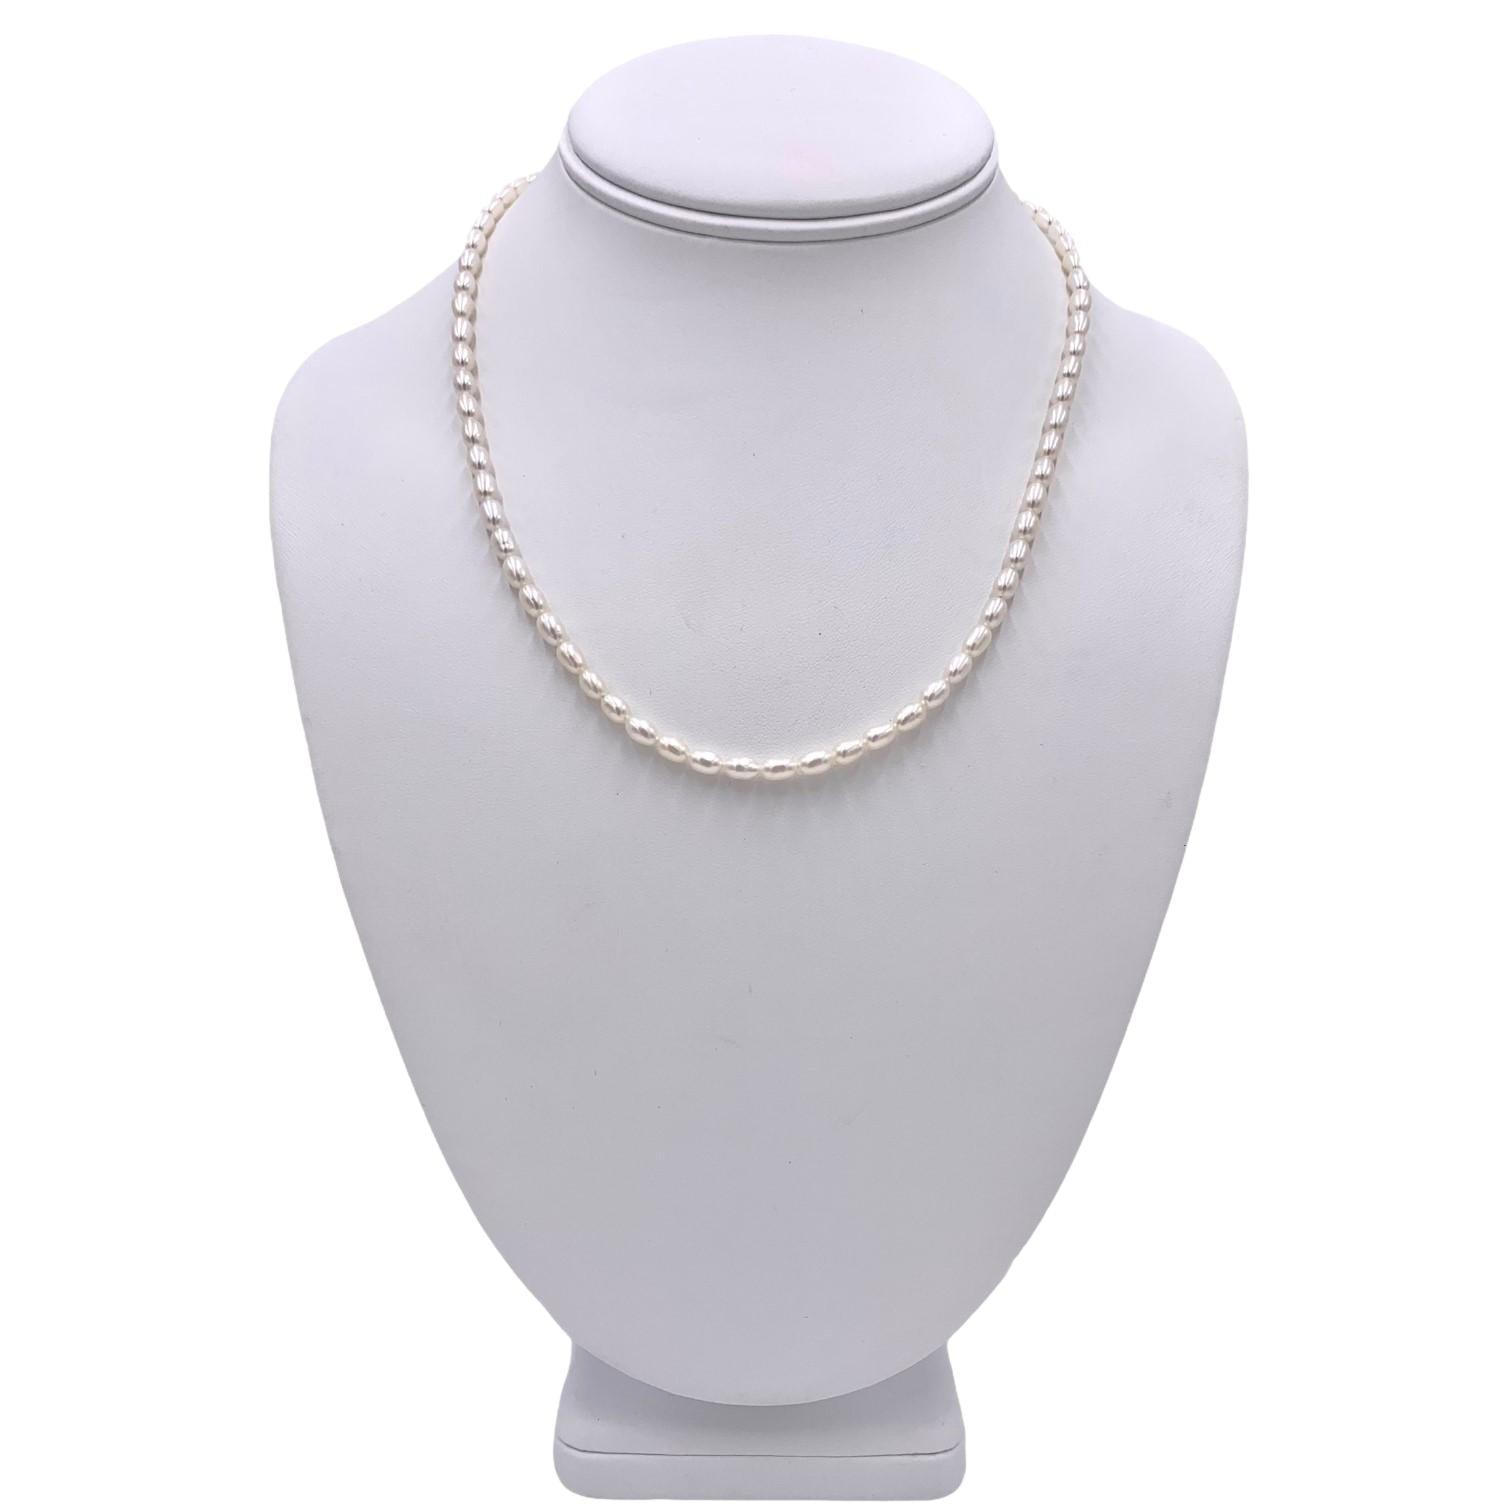 Stunning Real Pearl Necklace With 8mm Freshwater Pearls By Statement -  Statement Collective